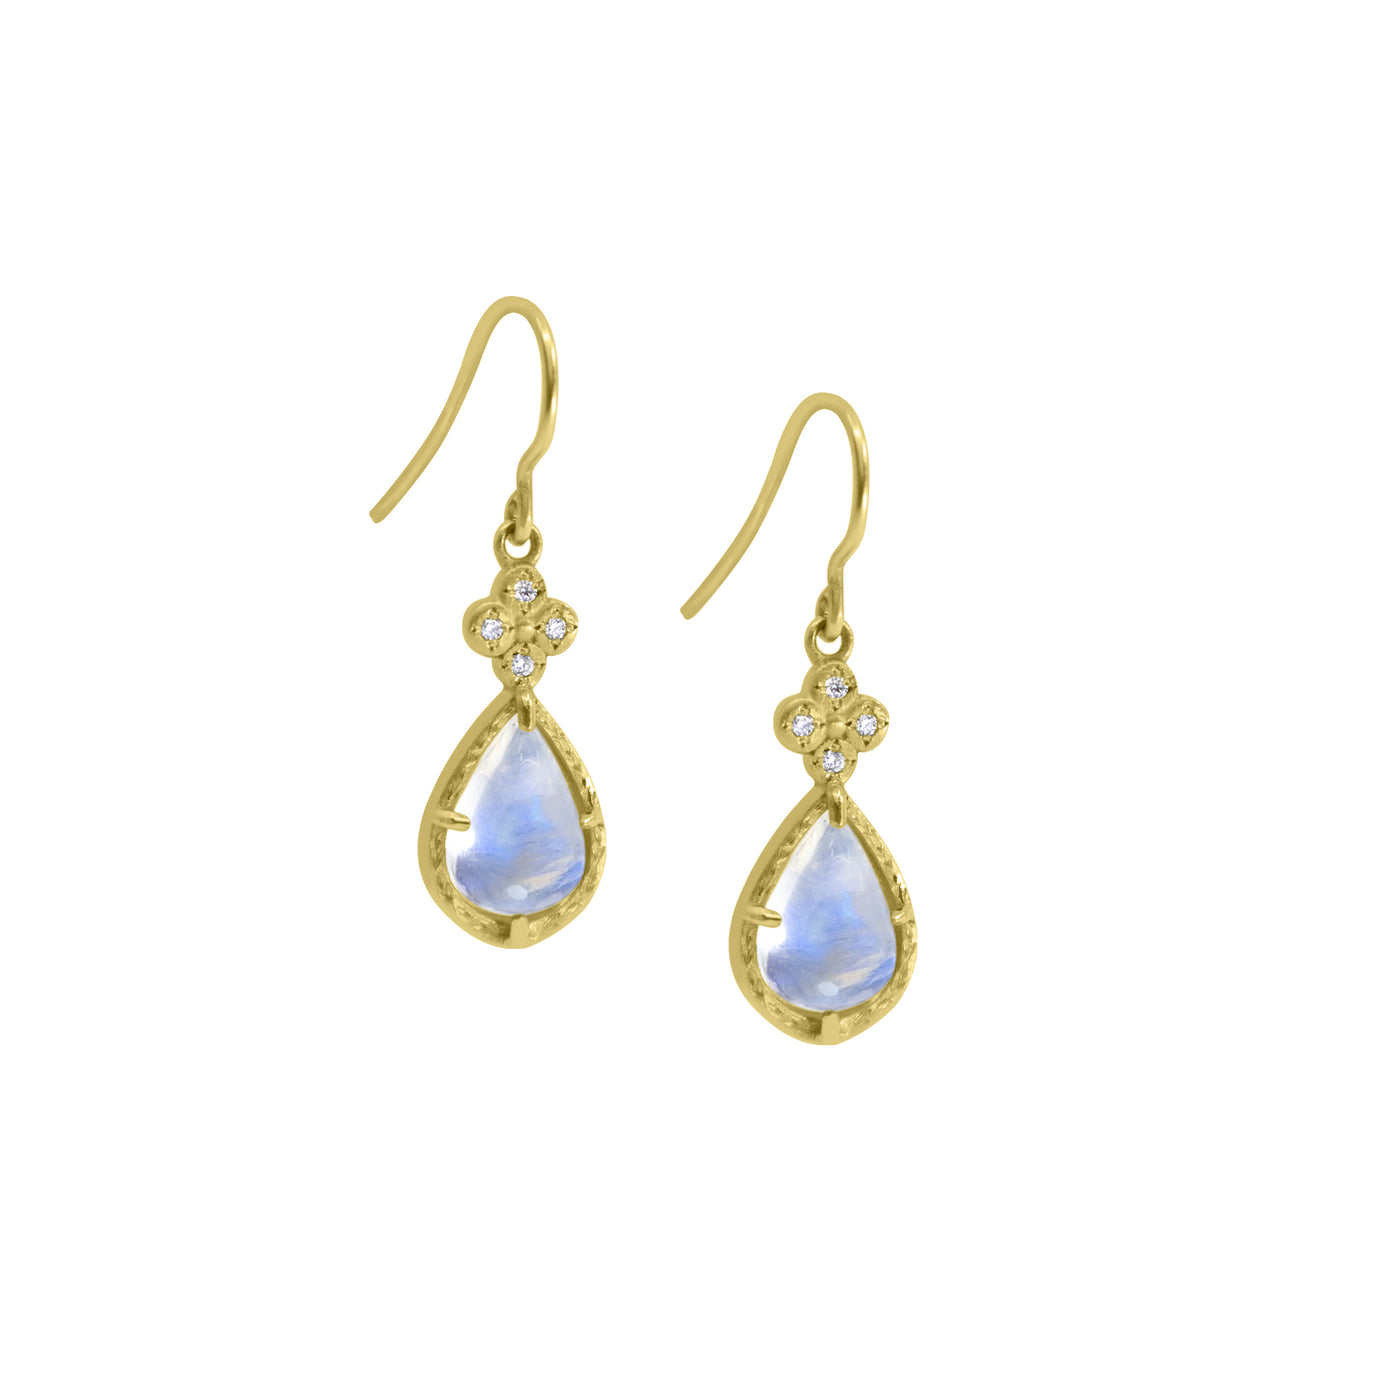 Prong Moonstone Earring with River Rocks Charm